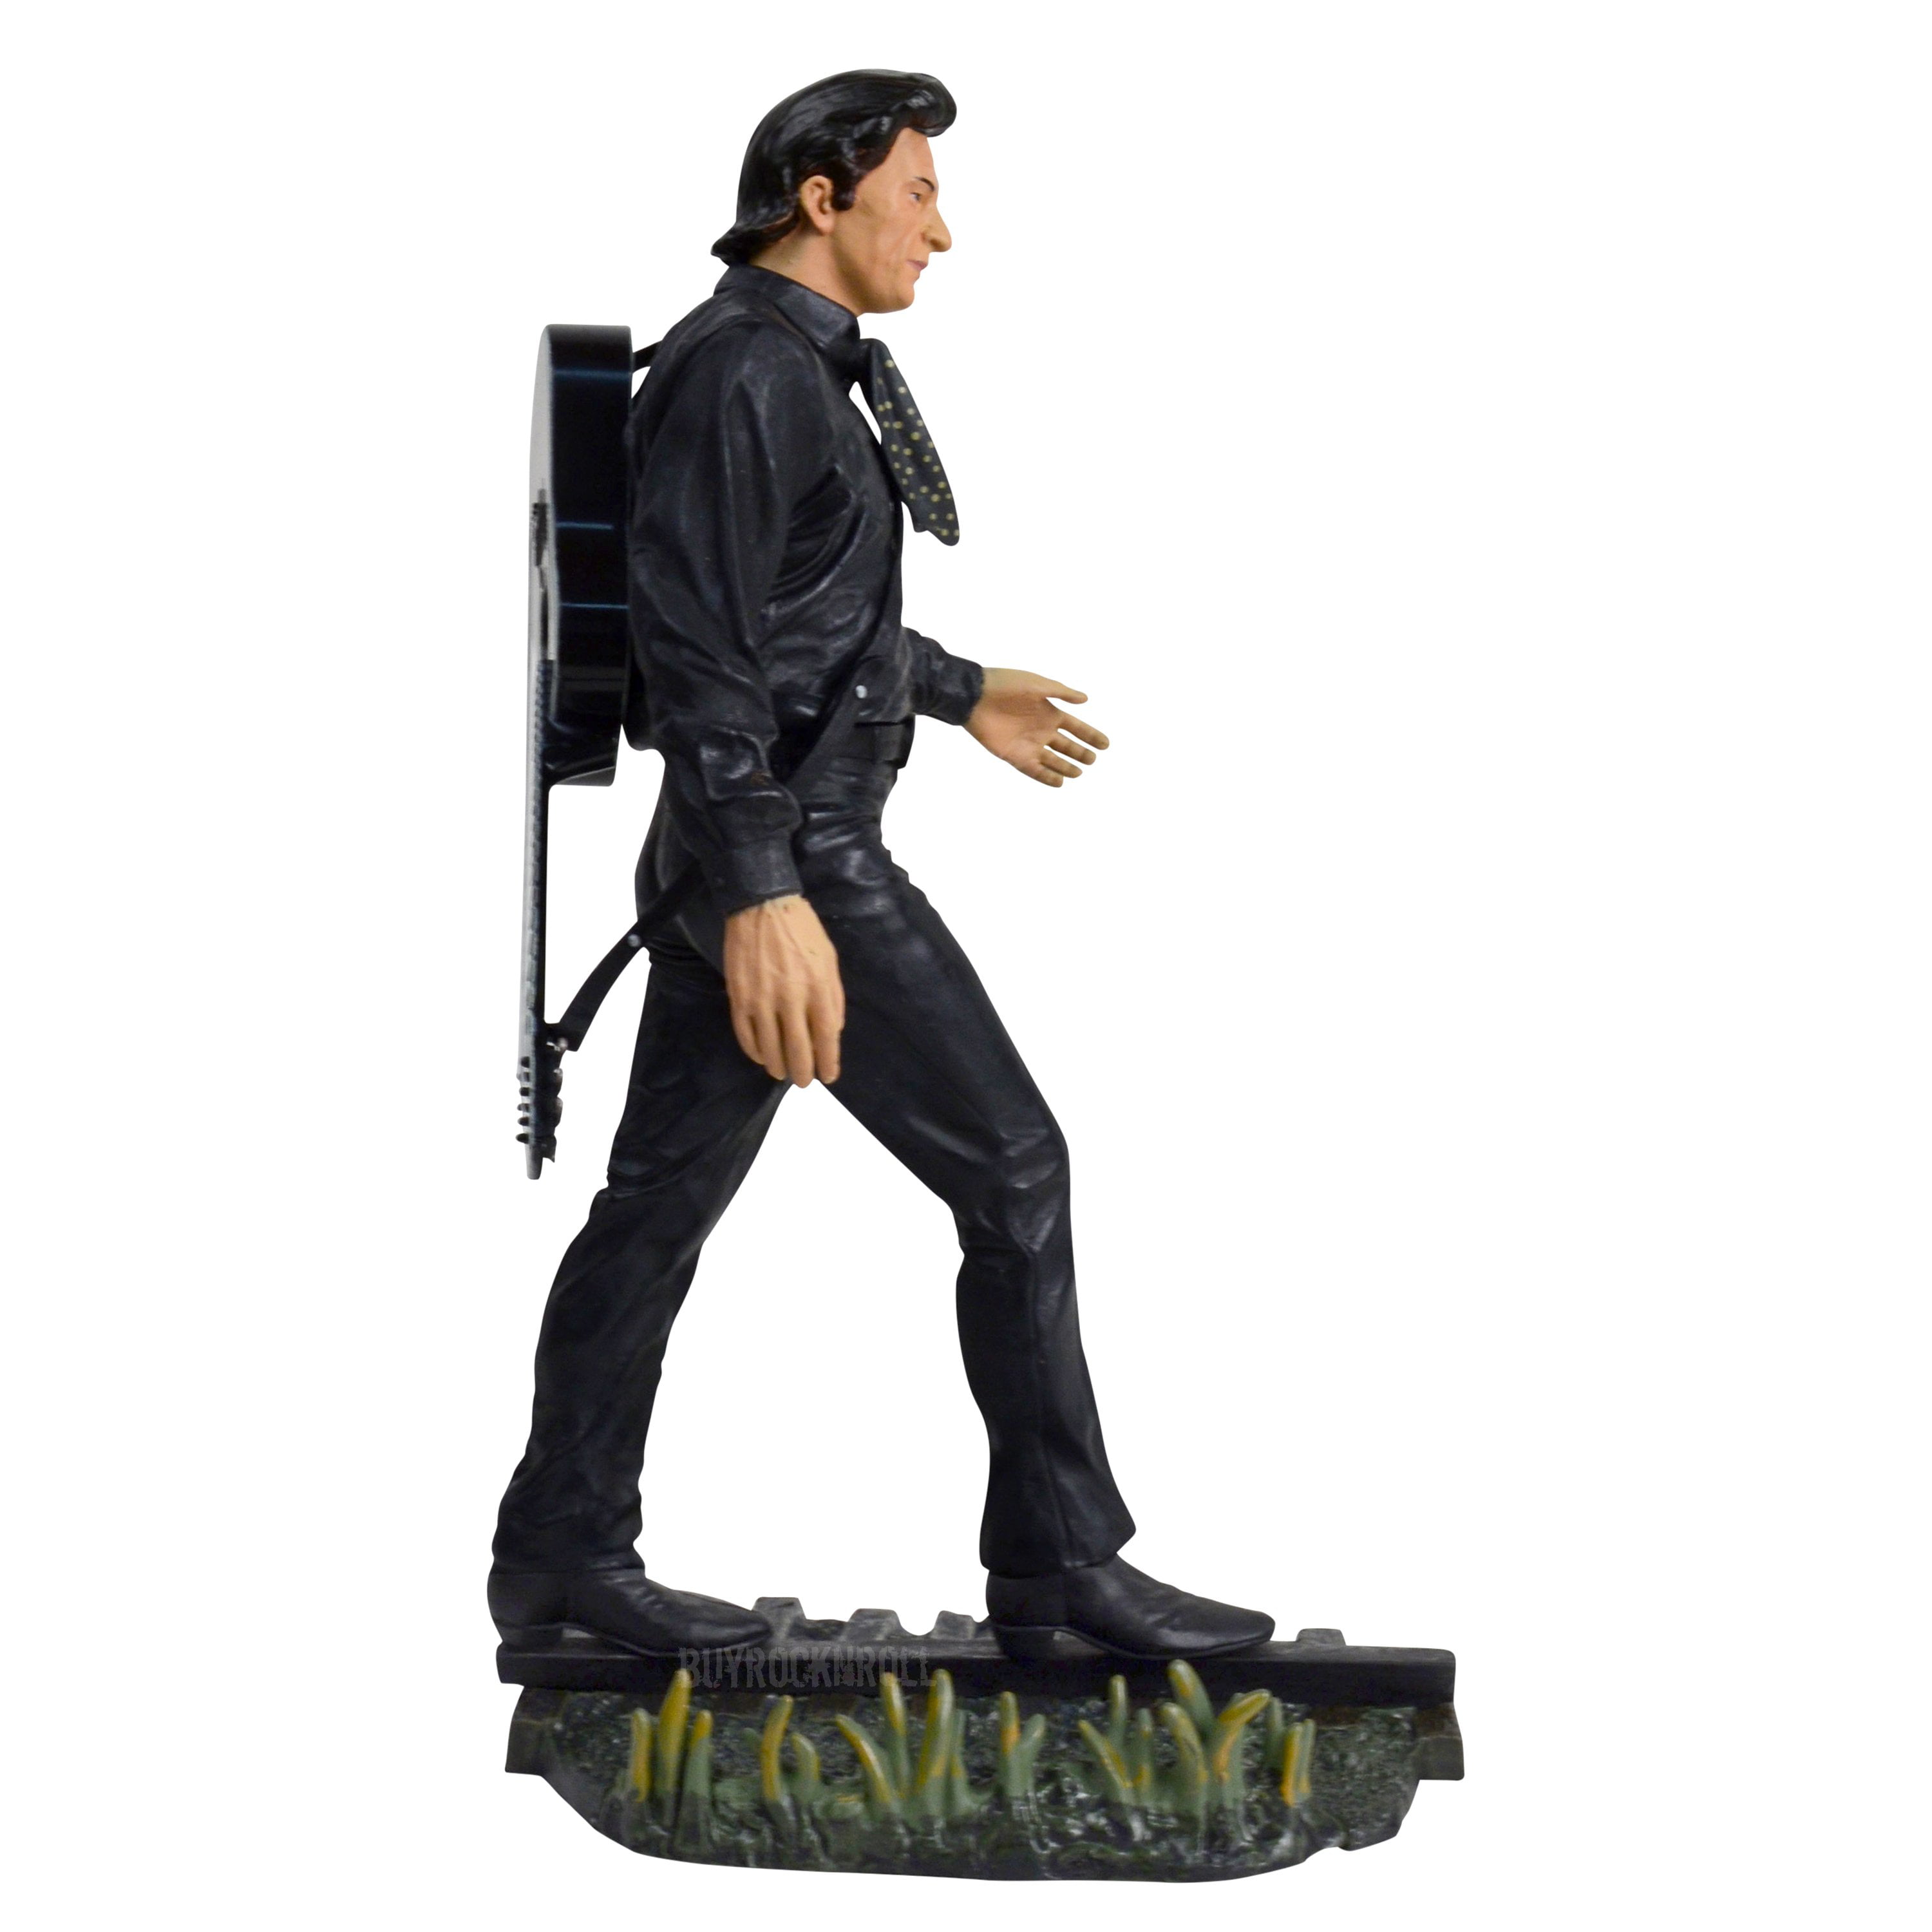 Johnny Cash WALK THE LINE action figure 2006 SOTA Toys with guitar 